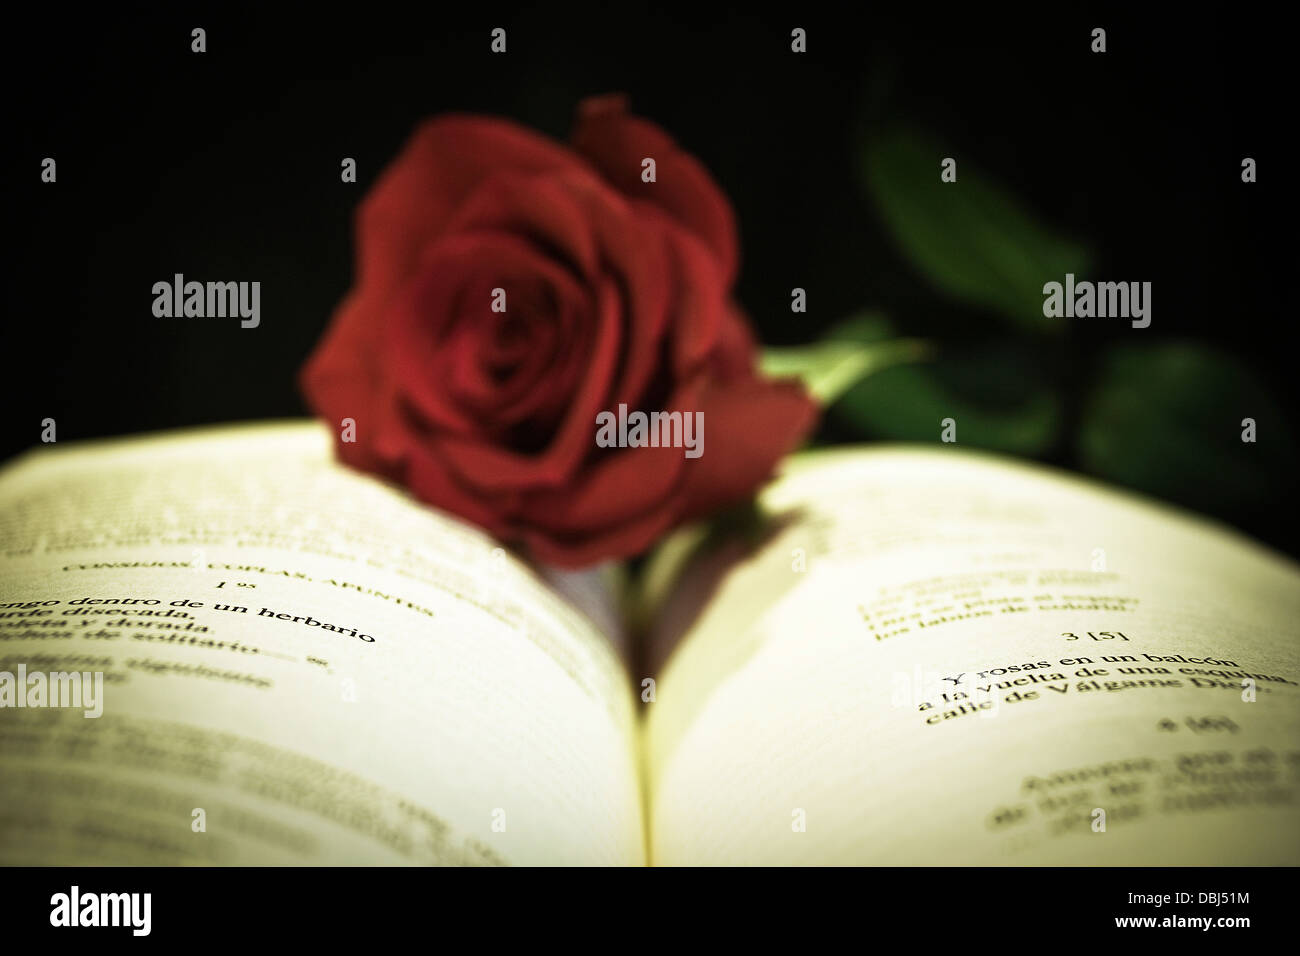 Open book with red rose on black background, still life ,poetic,romantic,love,photograph,creative,flower,light Stock Photo